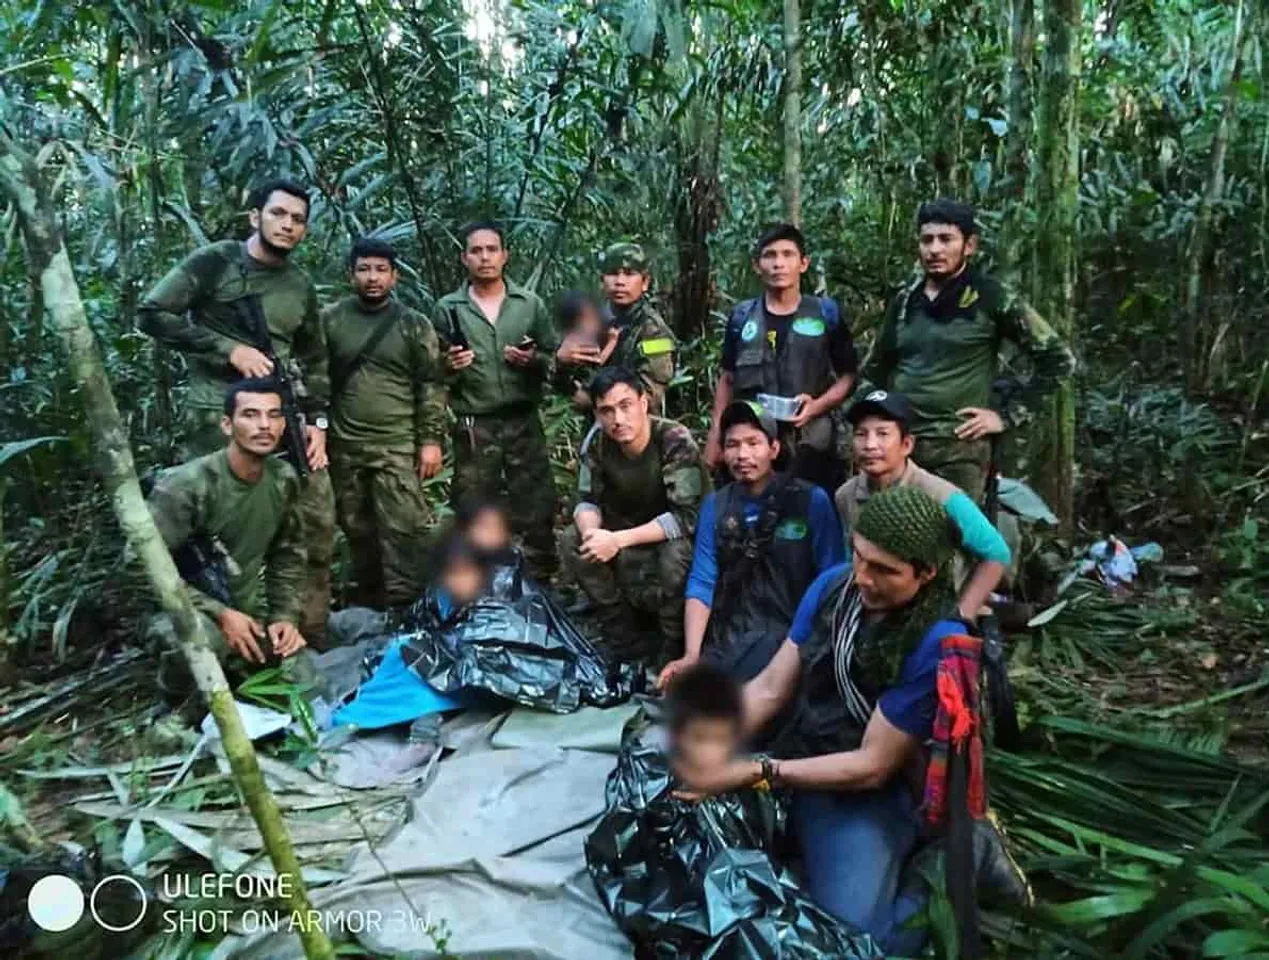 Footprints And Half-Eaten Fruits: What Led To Missing Children Of Colombian Plane Crash